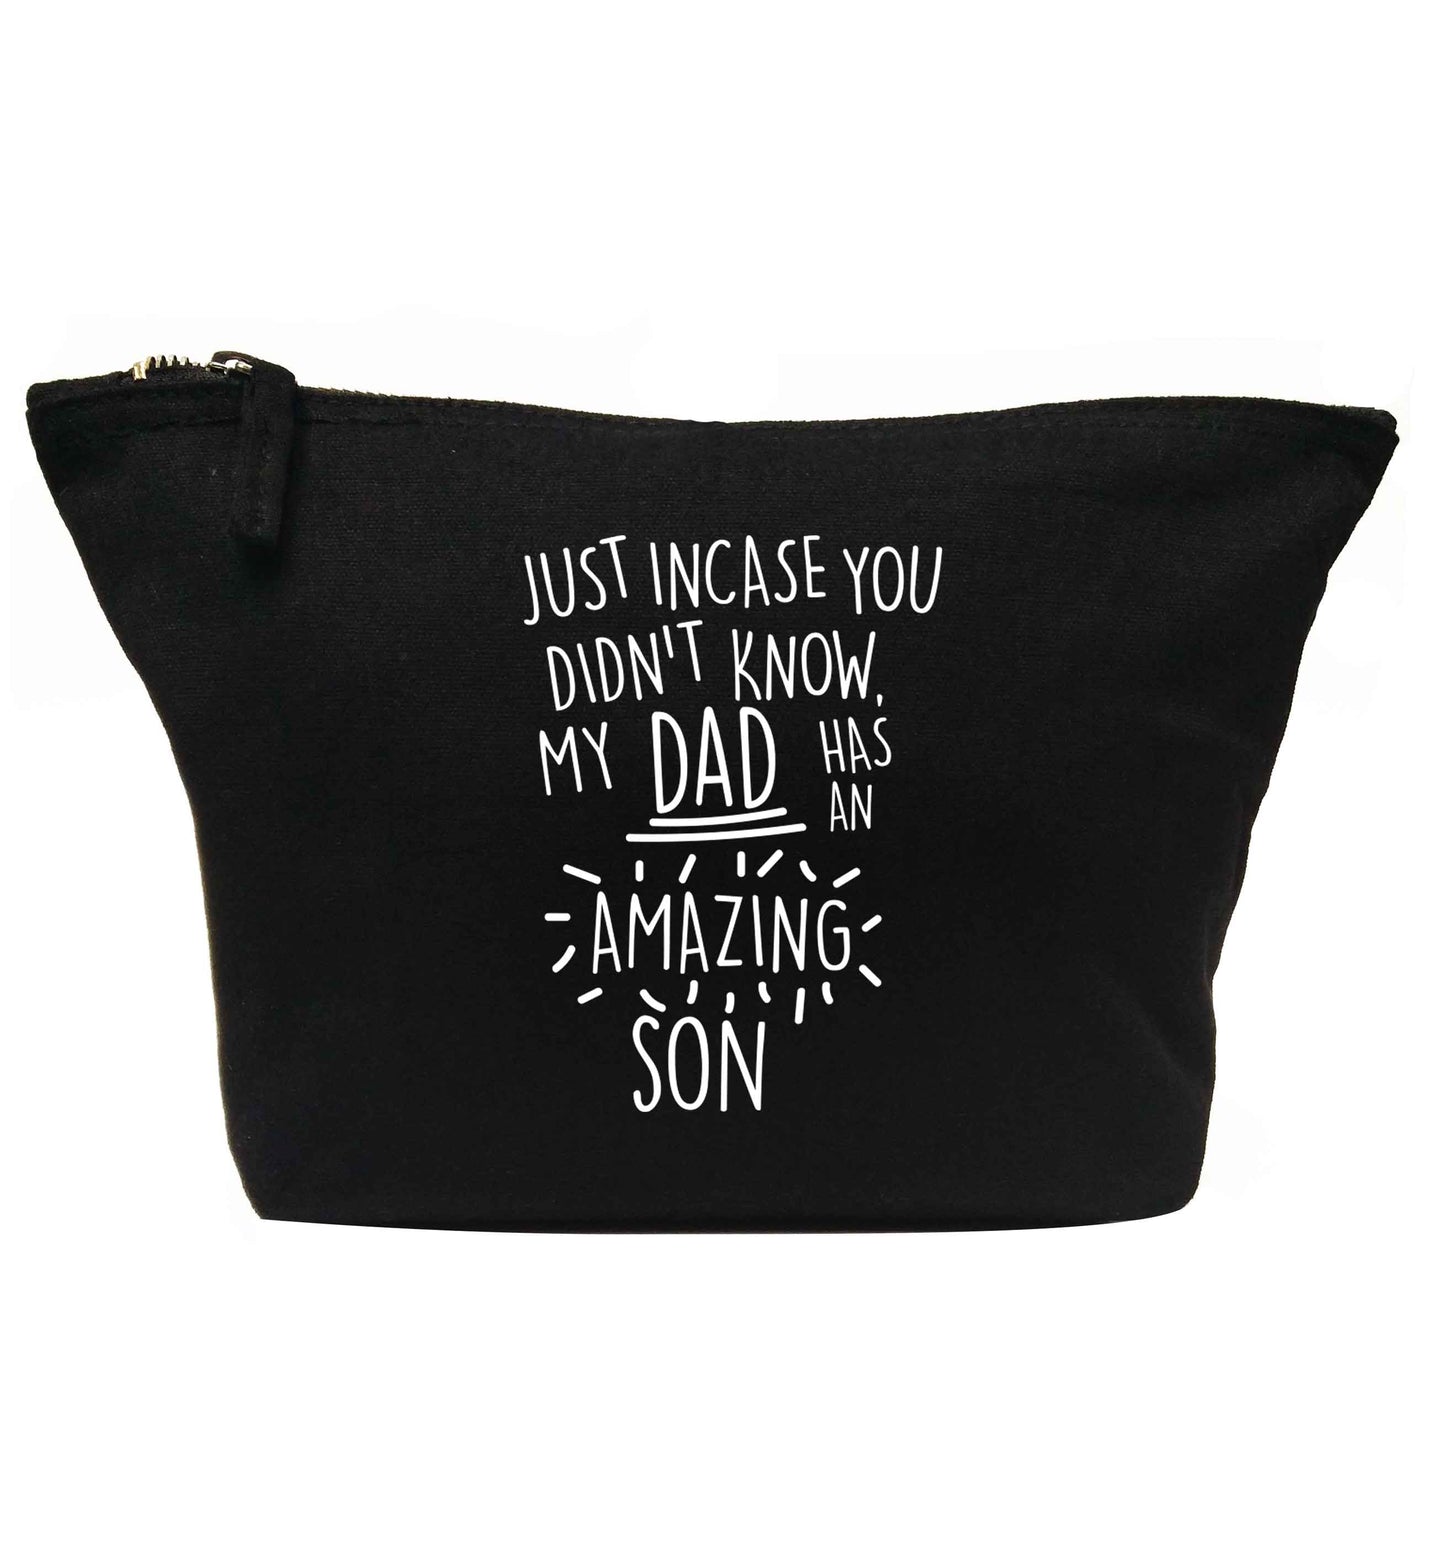 Just incase you didn't know my dad has an amazing son | Makeup / wash bag